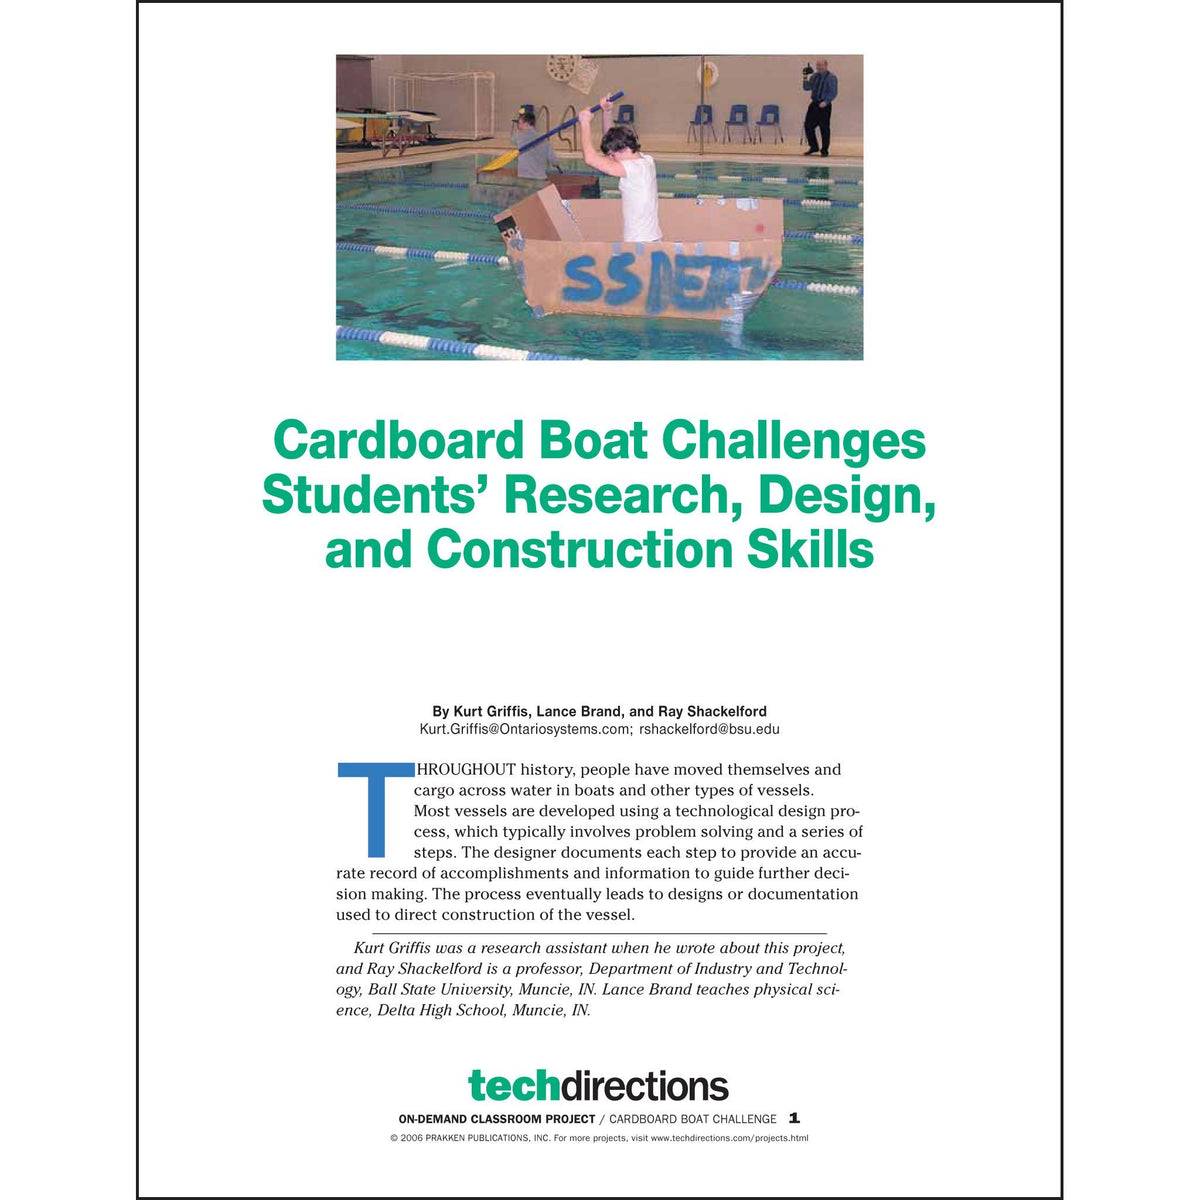 Cardboard Boat Challenges Students Classroom Project pdf – Tech